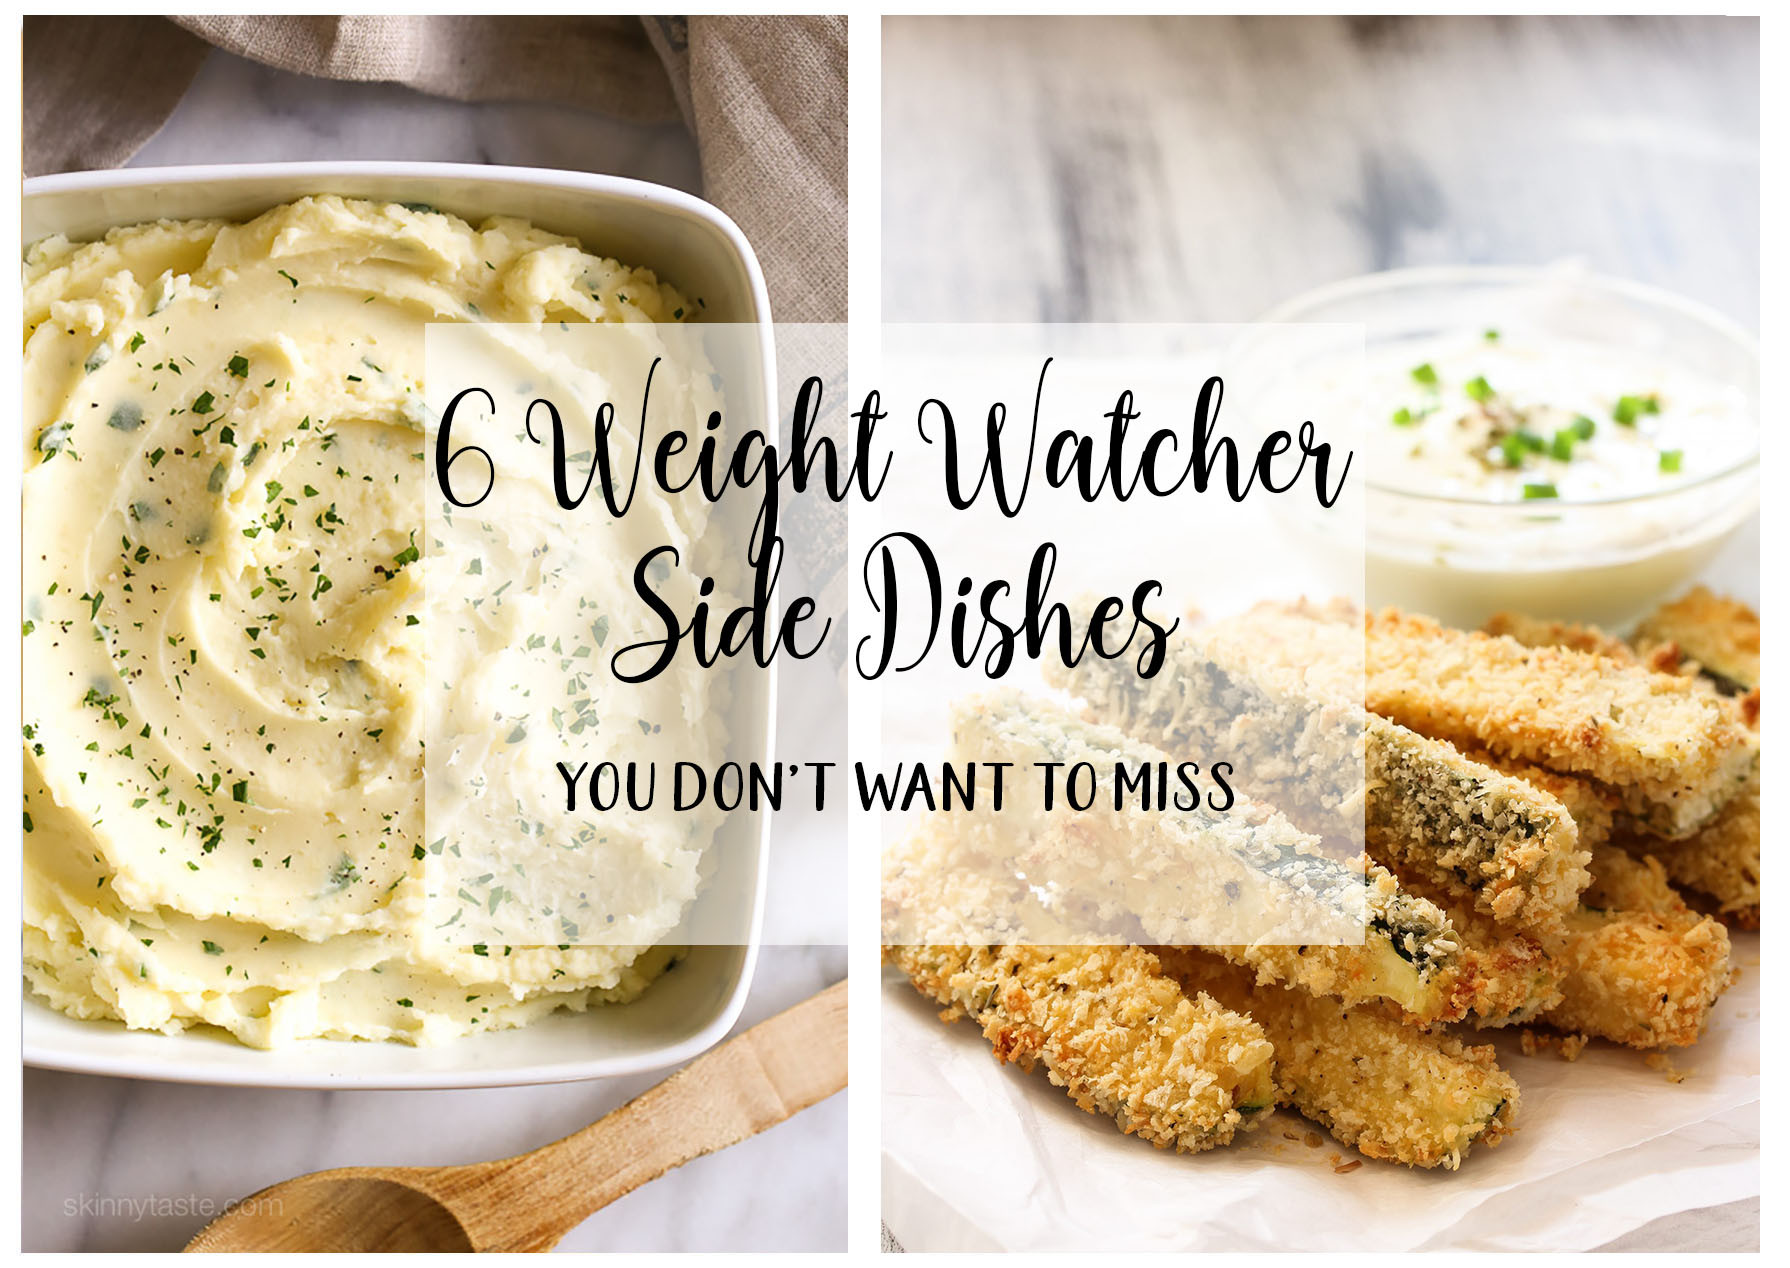 Weight Watcher Side Dishes
 6 Weight Watcher sides you will eat over and over